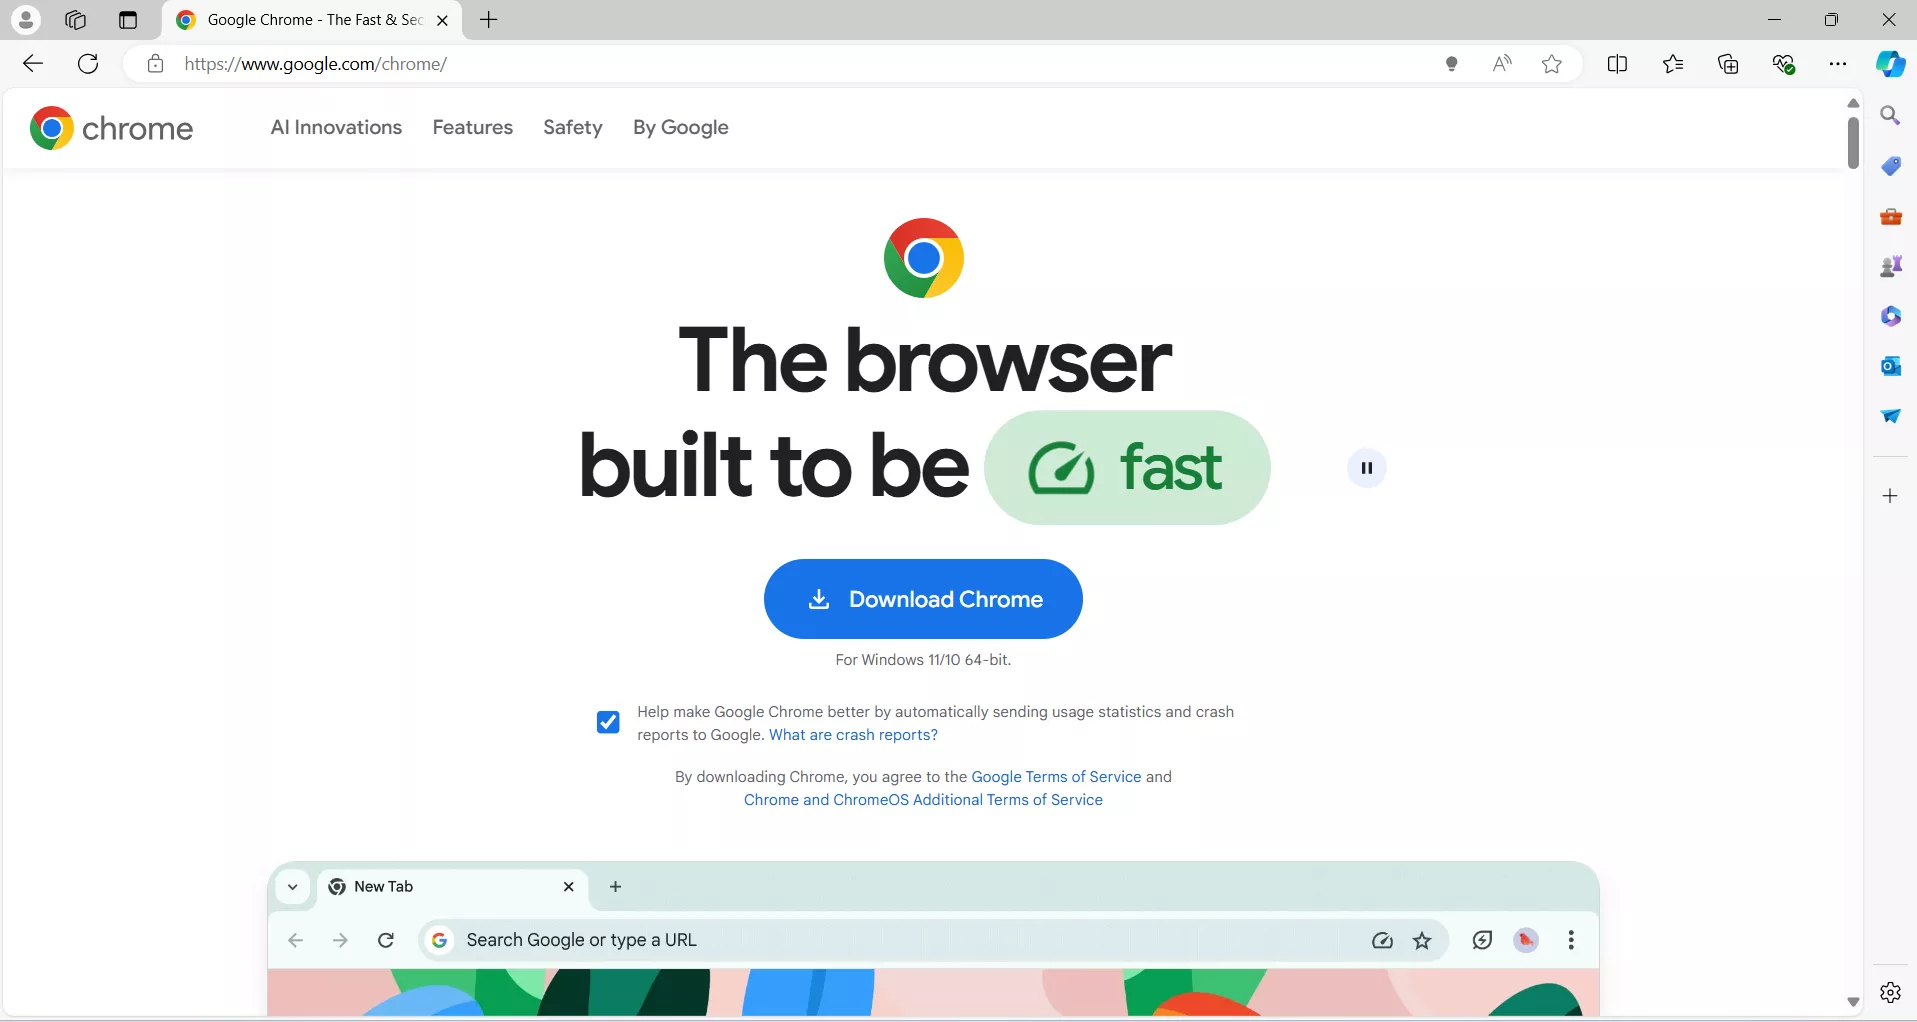 download the chrome to fix ChatGPT no repsonse